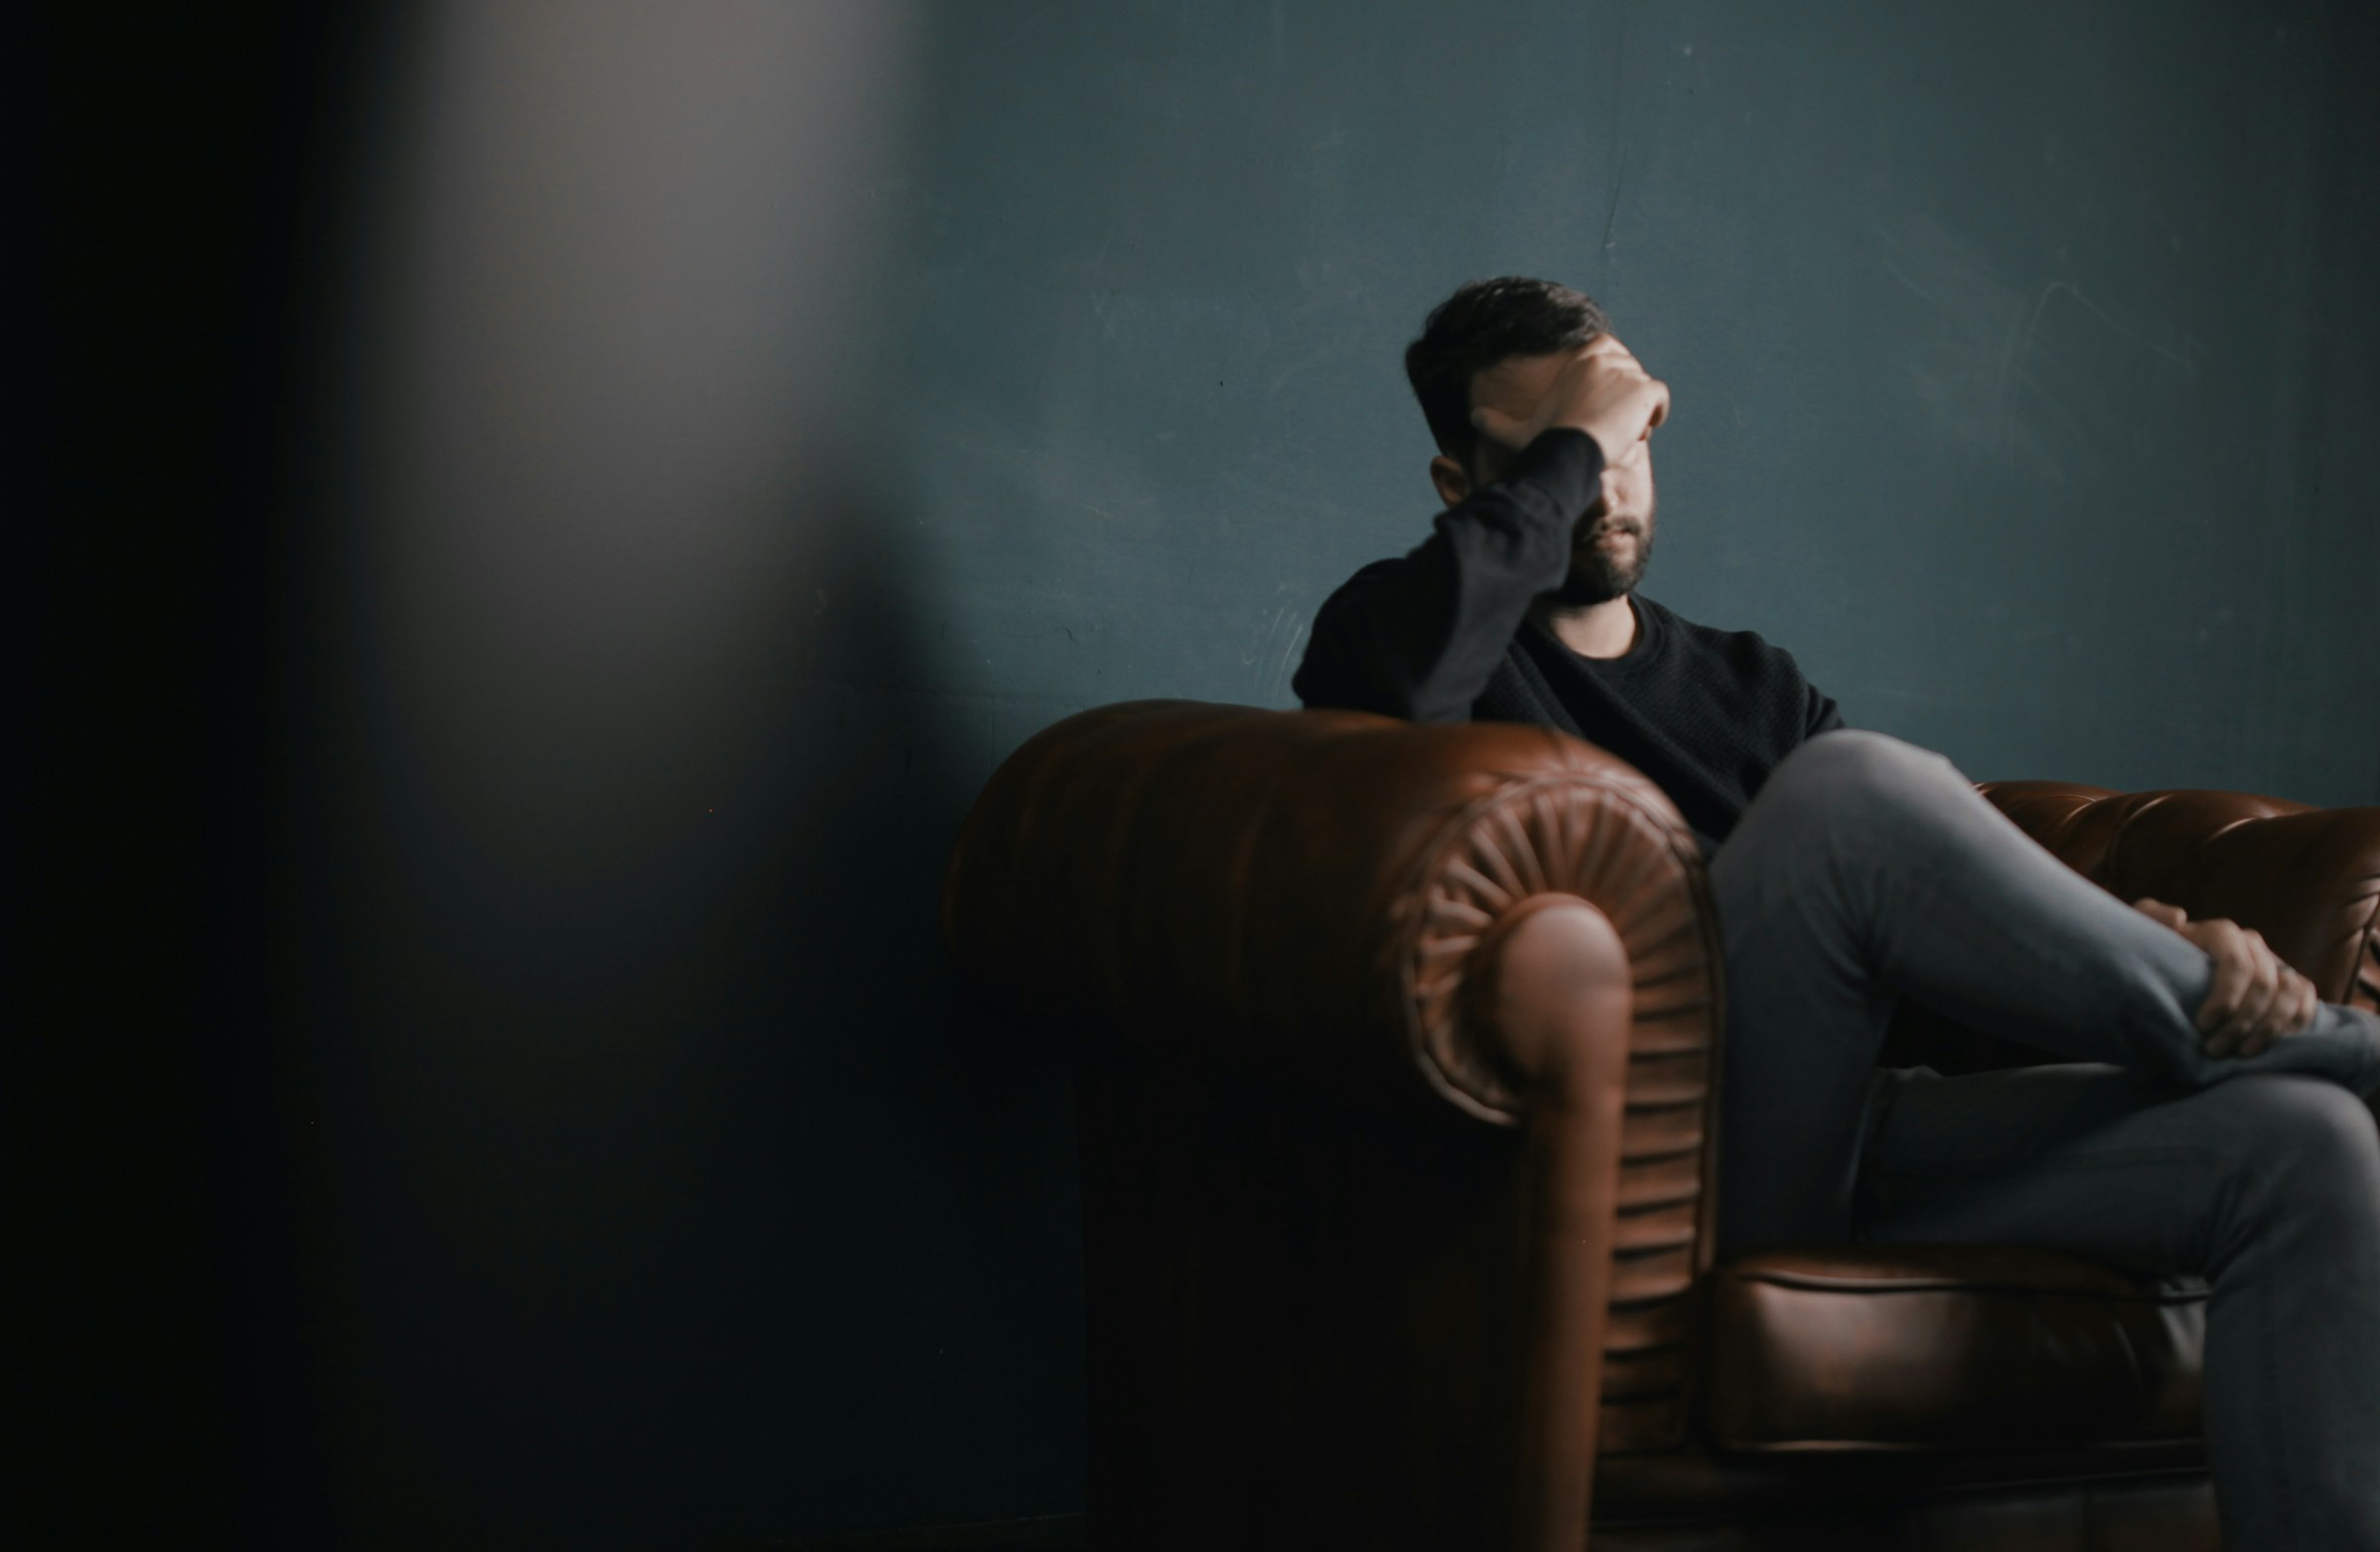 A man sitting on a couch | Source: Pexels